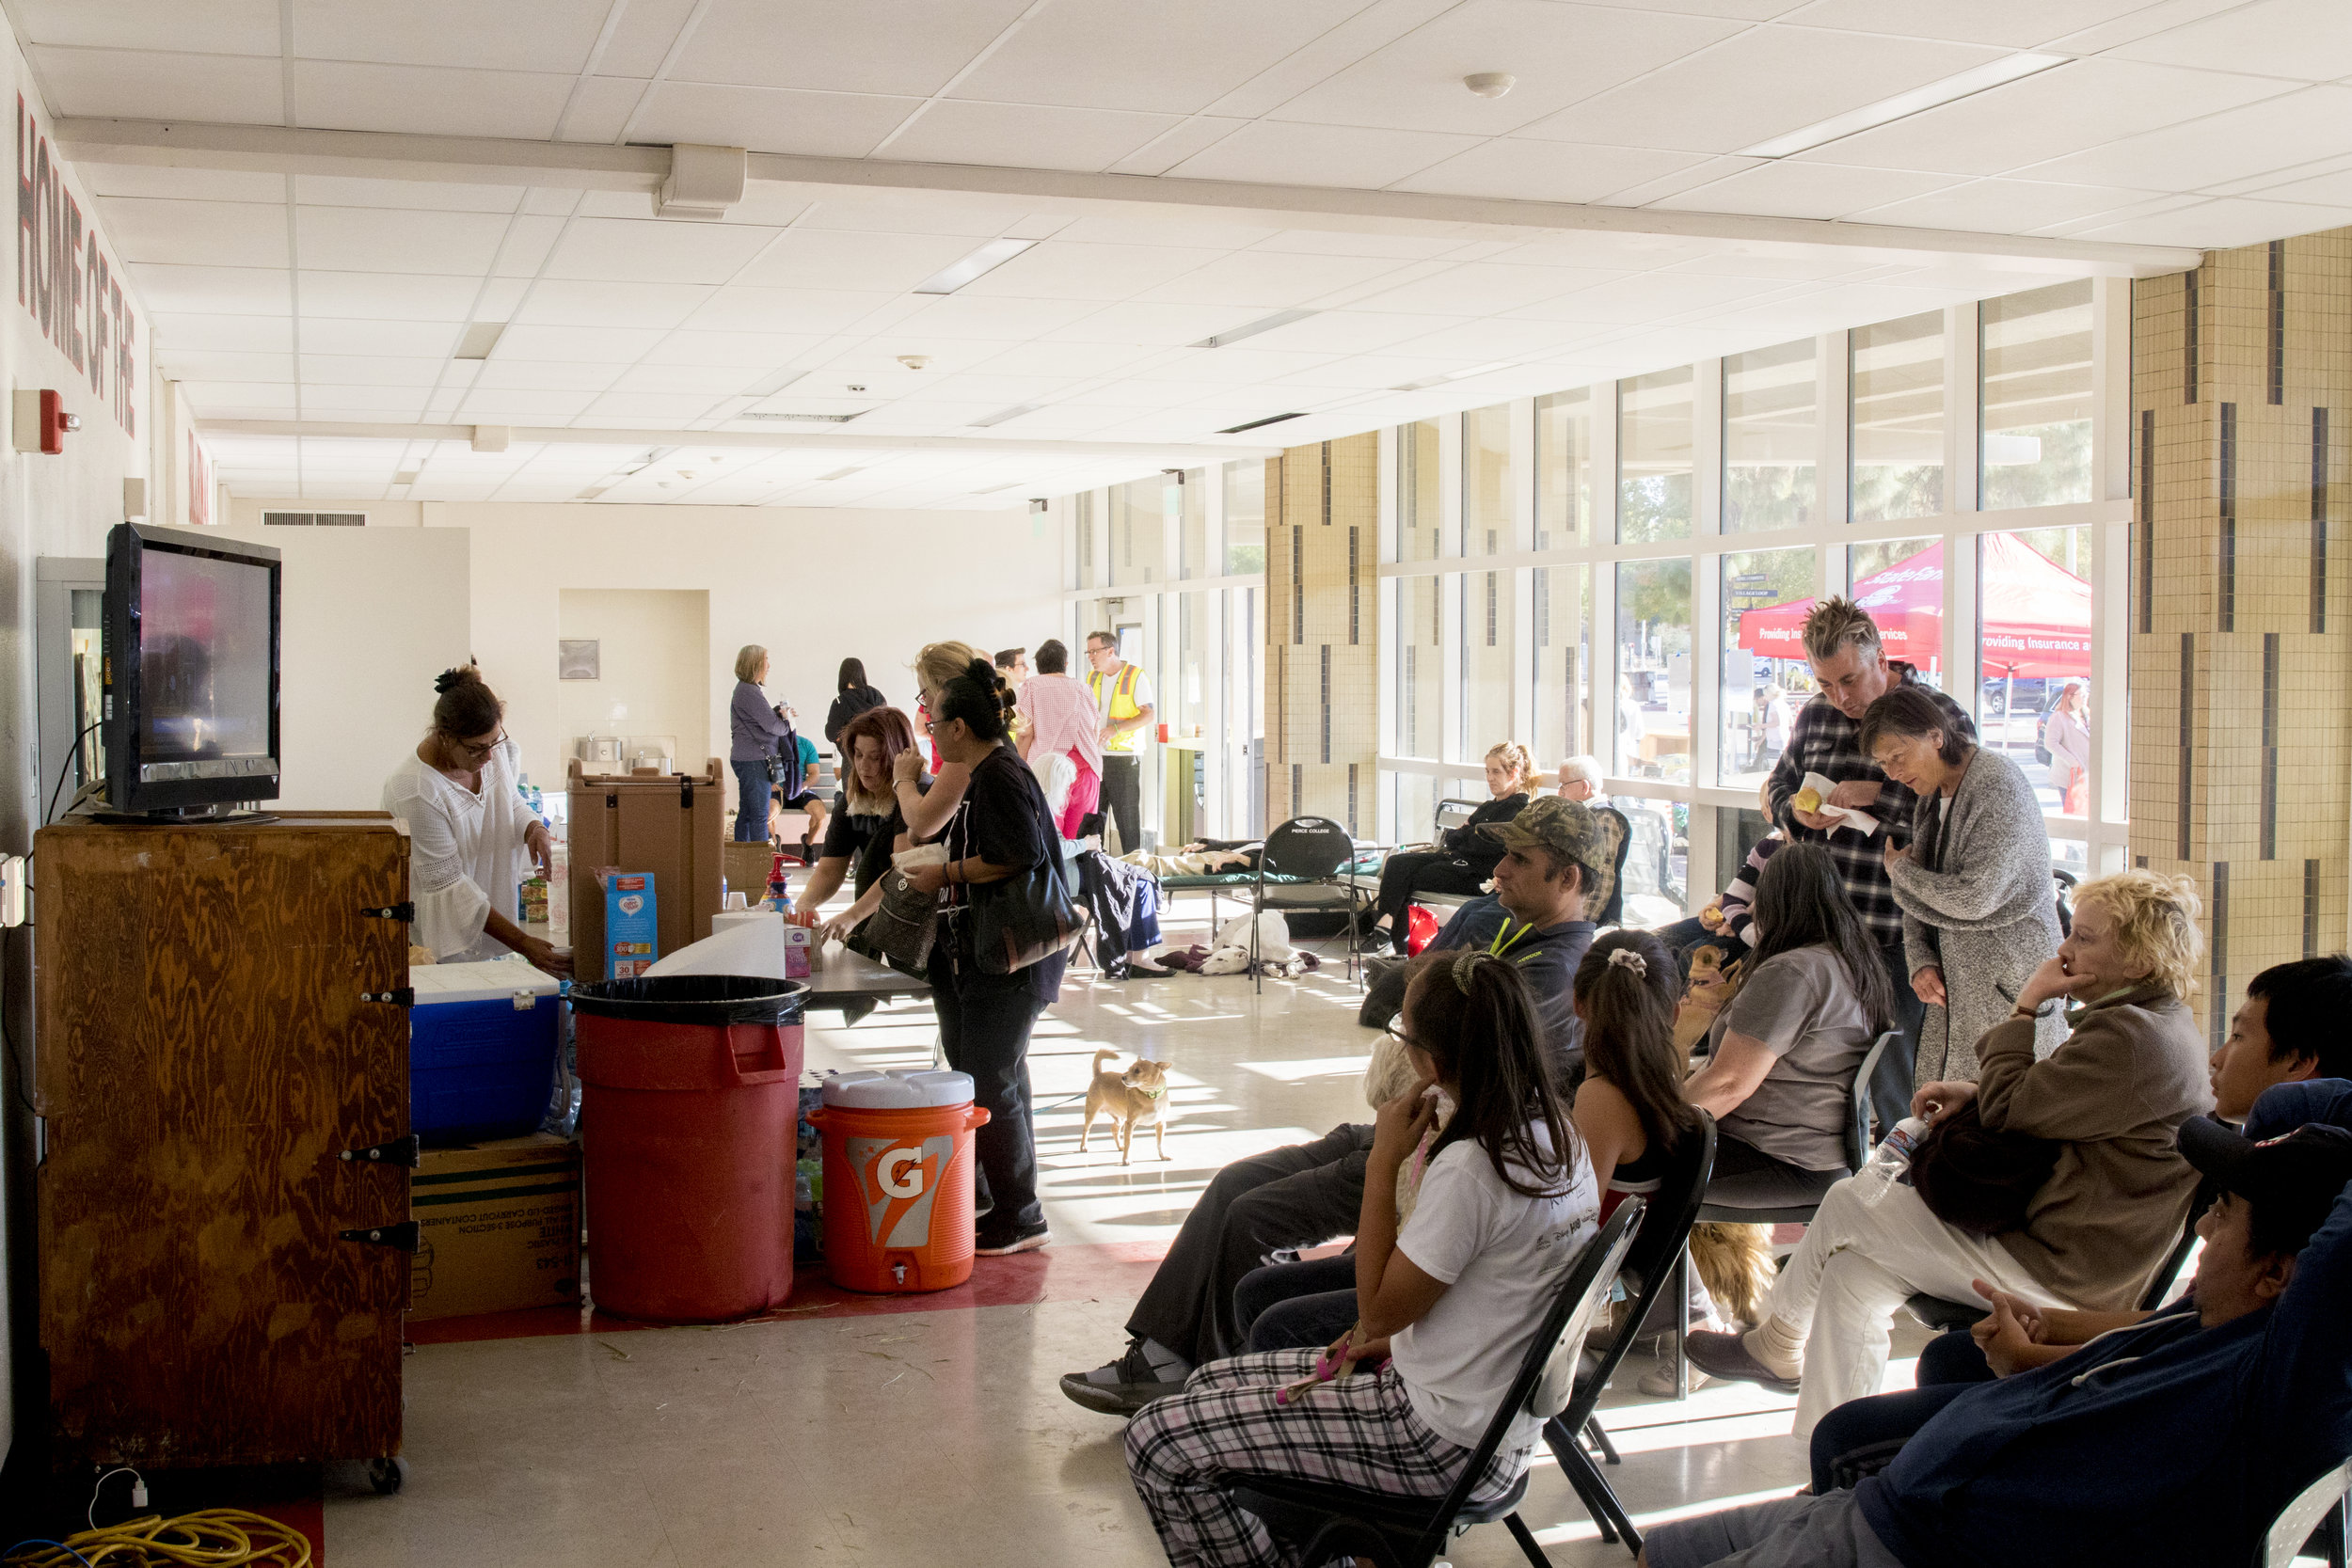  Evacuees of the Woolsey Fire watch live news to get updates on their homes and neighborhoods and receive nourishment at their evacuation center located at Pierce College in Woodland Hills, California on November 9, 2018 (Zane Meyer-Thornton/Corsair 